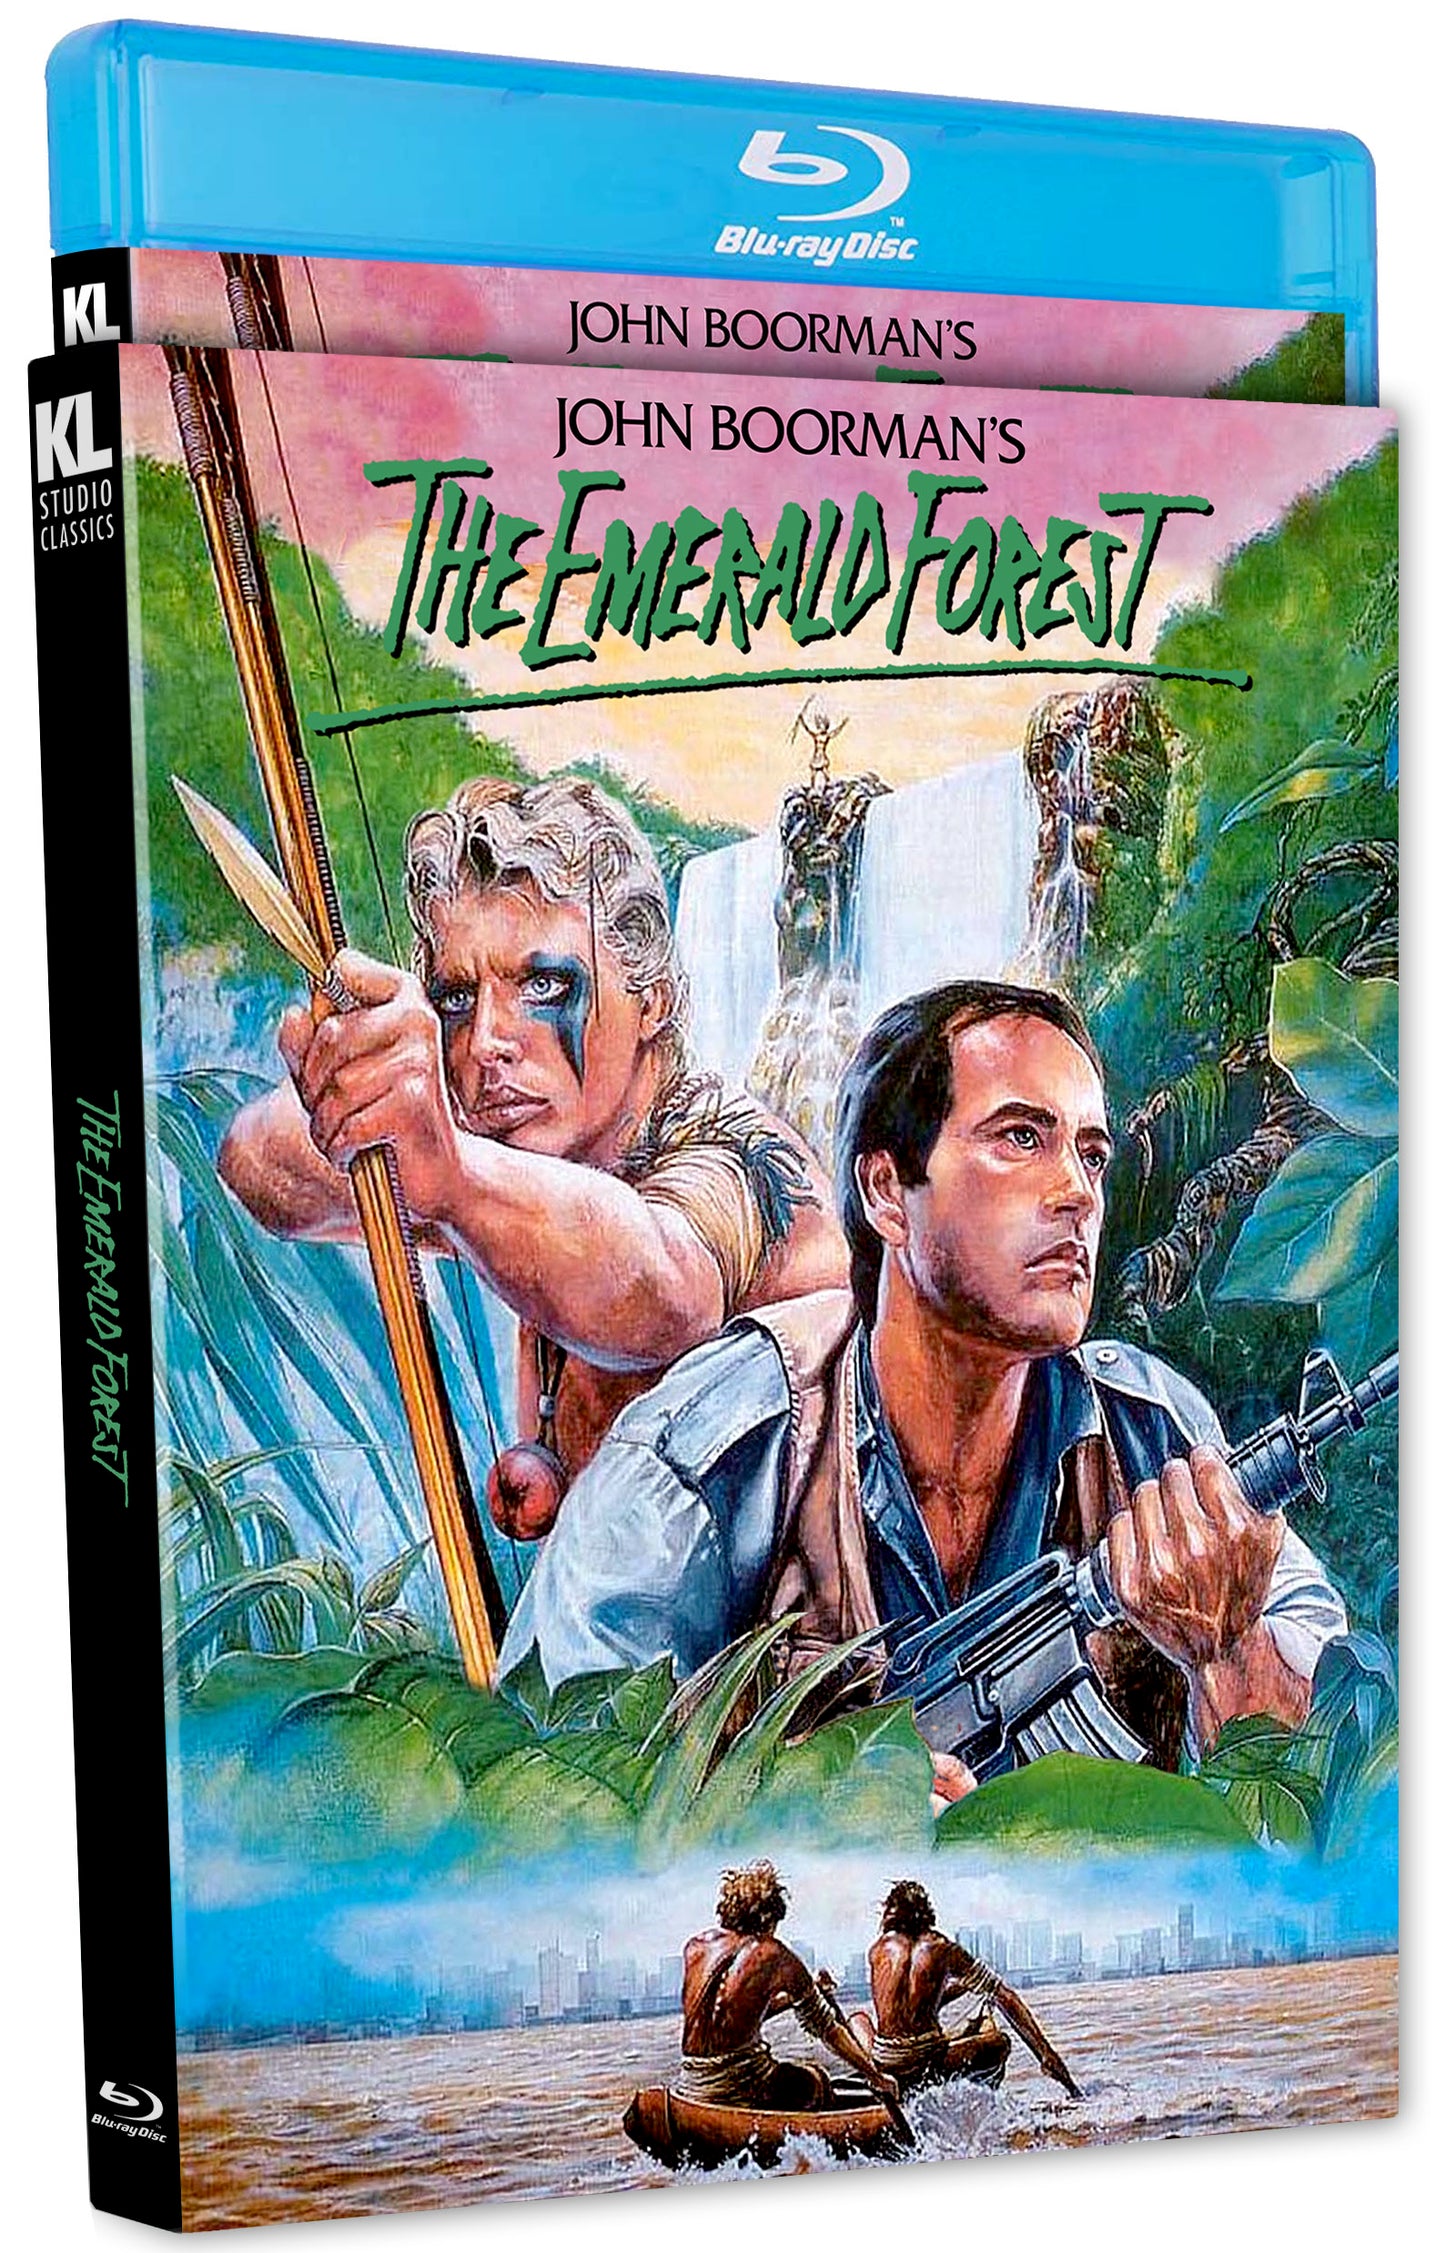 The Emerald Forest Blu-ray with Slipcover (Kino Lorber)